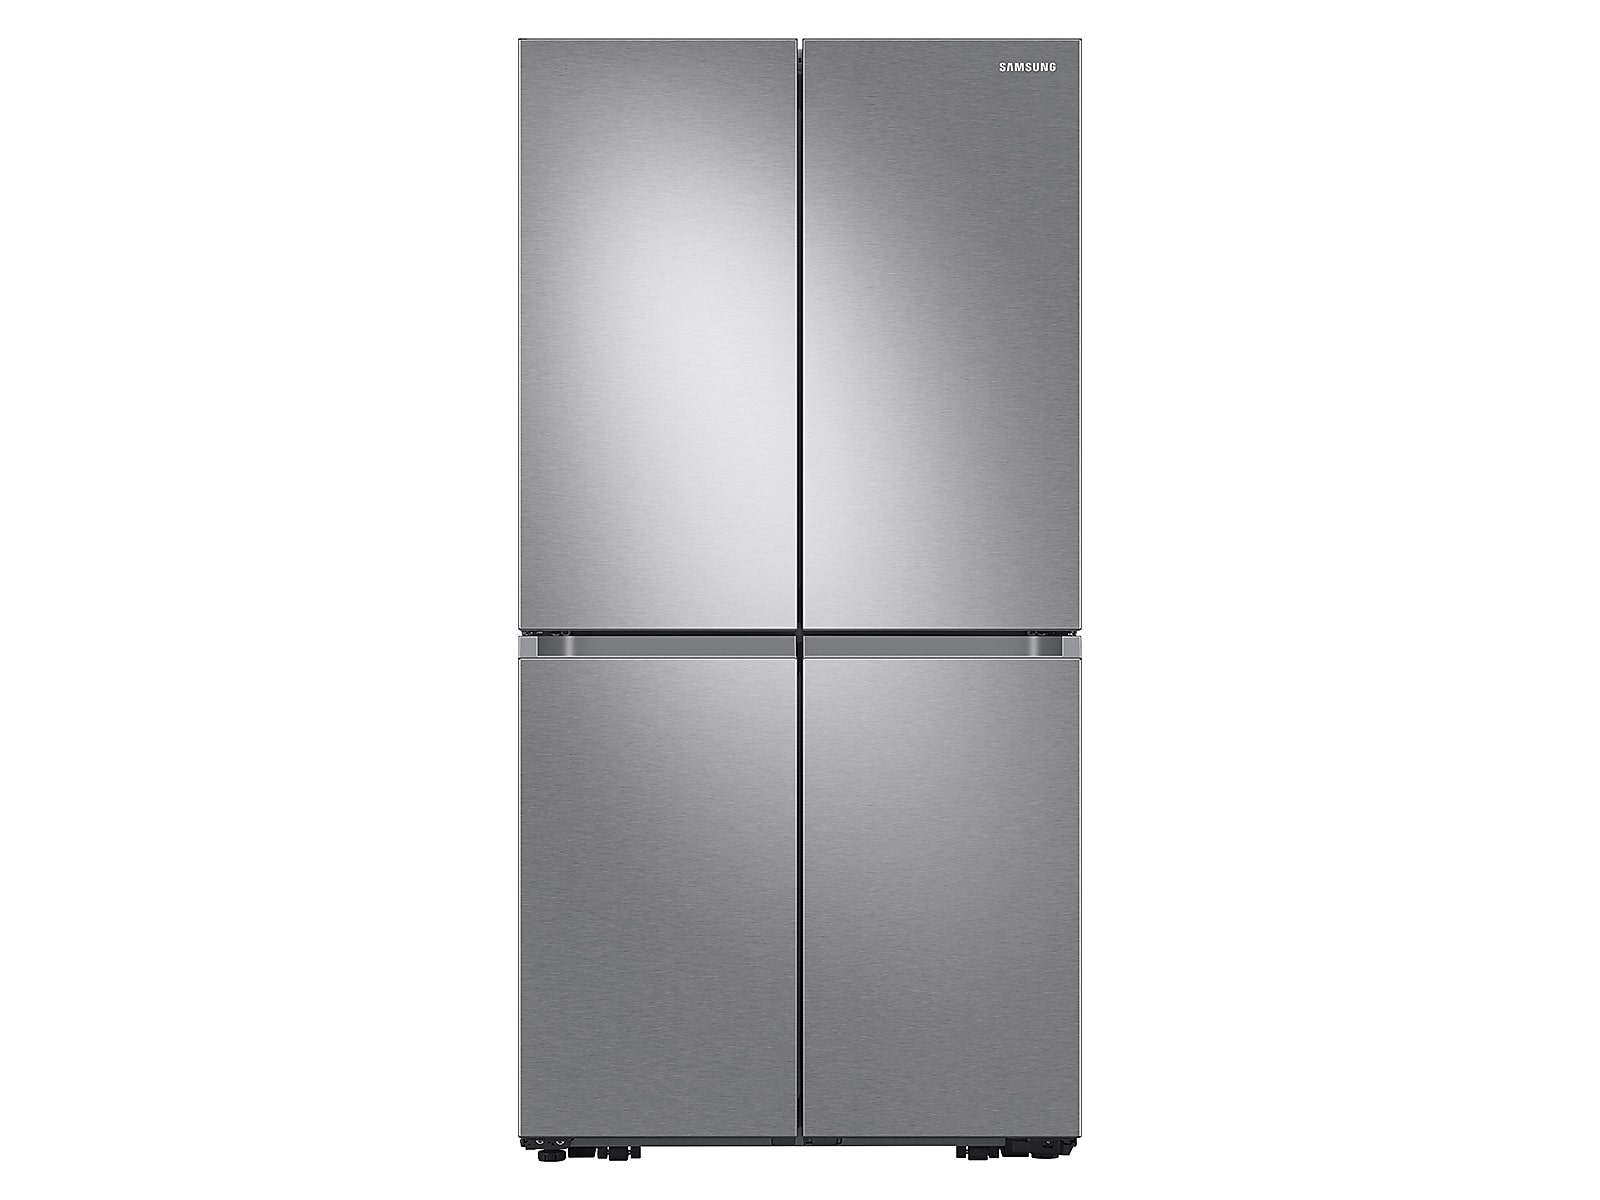 Samsung 23 cu. ft. Smart Counter Depth 4-Door Flex™ refrigerator with AutoFill Water Pitcher and Dual Ice Maker in Stainless Steel